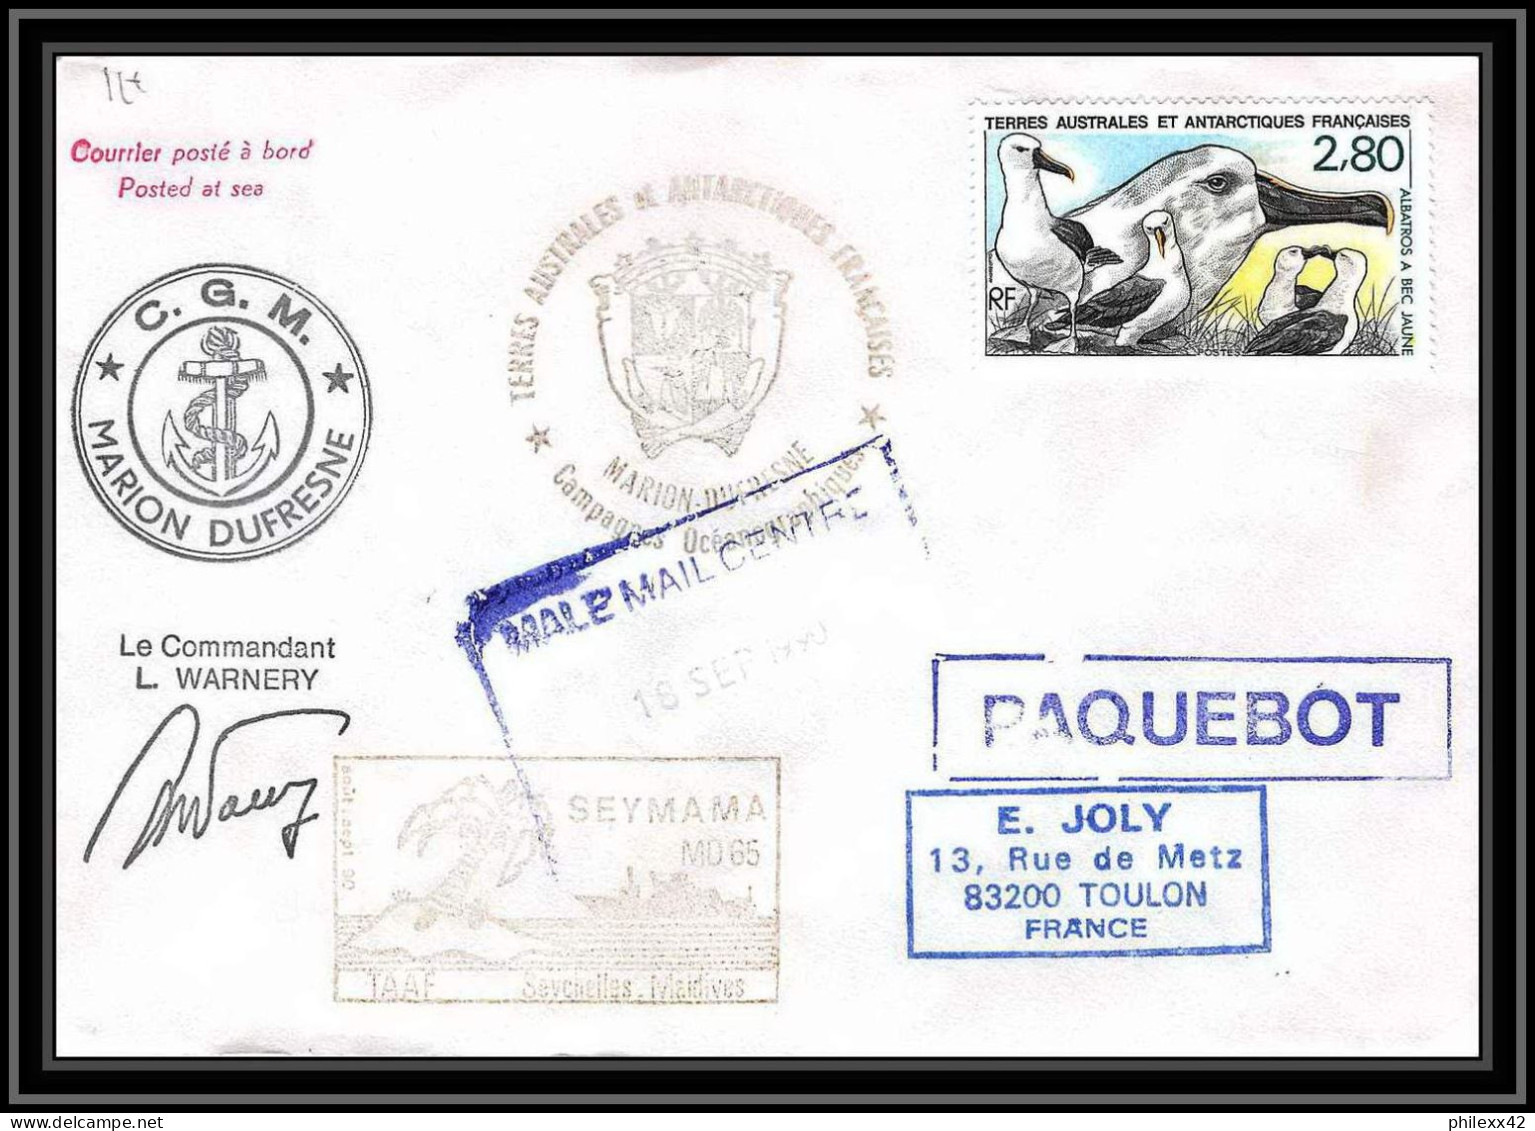 1098 Taaf Terres Australes Antarctic Lettre (cover) N° 18/09/1990 Dufresne PAQUEBOT Signé Signed Autograph - Covers & Documents